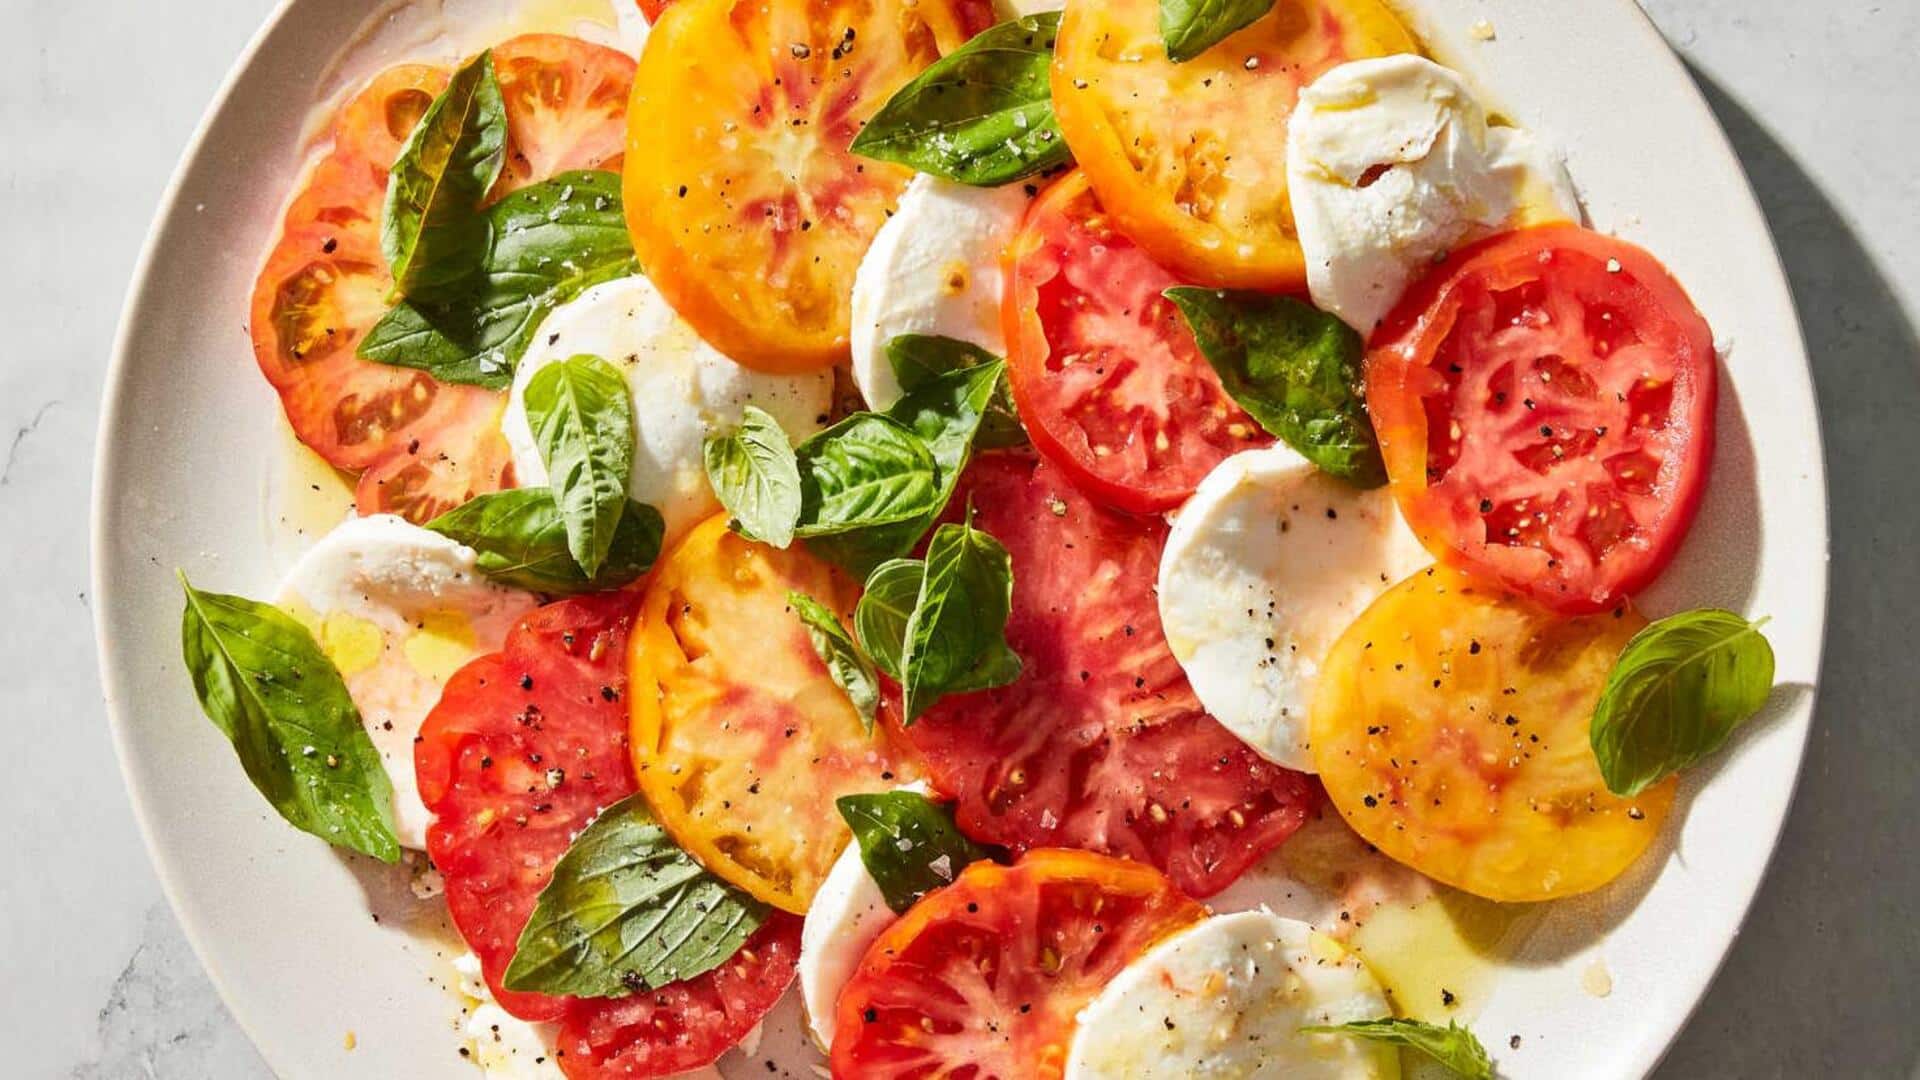 A step-by-step guide to making heirloom tomato caprese salad